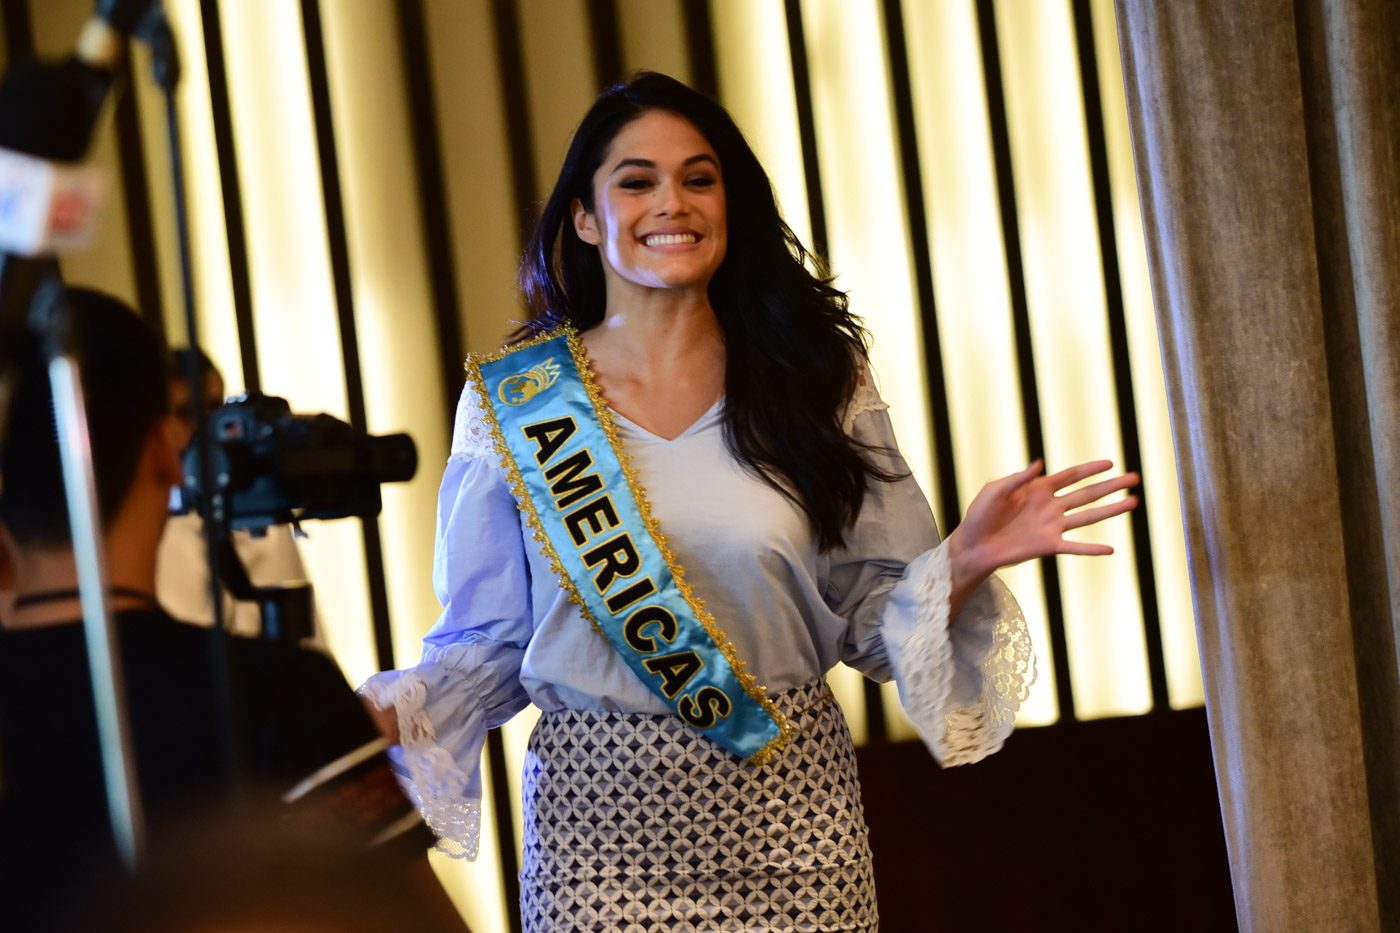 Audra entering the press conference of the Miss World Organization on September 1. 